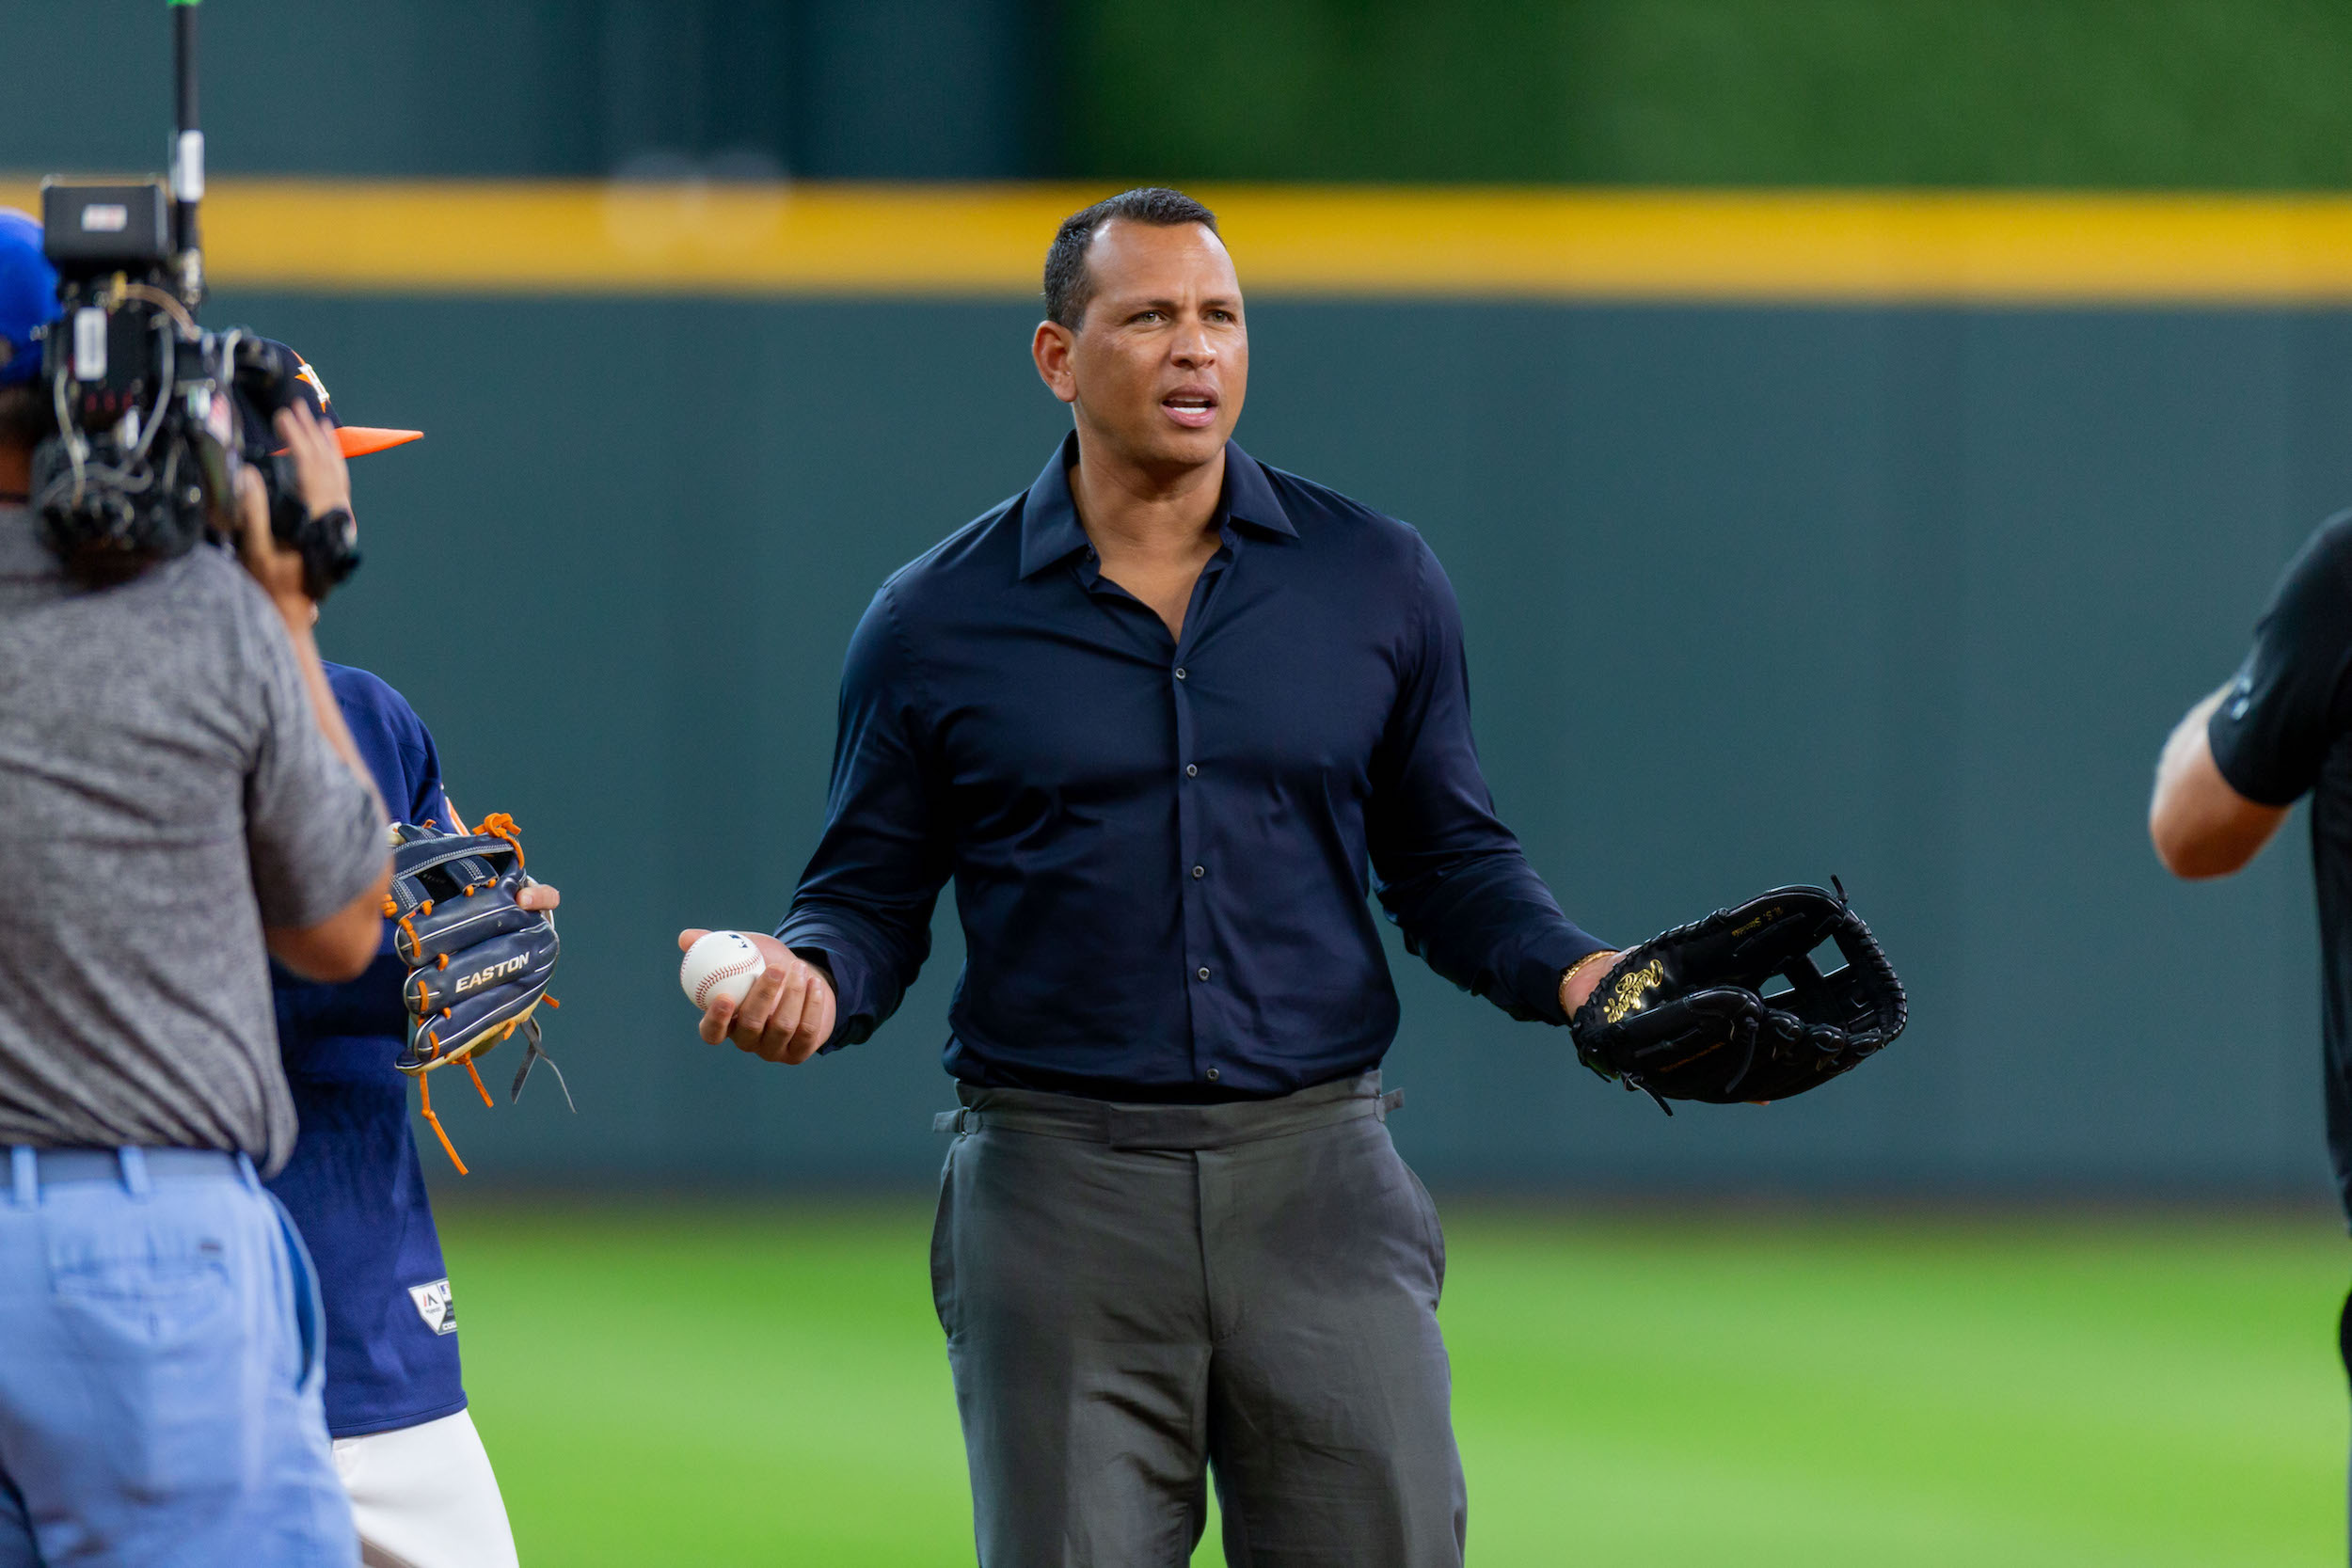 Due to his interest in buying the New York Mets, Alex Rodriguez won't be calling their game on ESPN Sunday Night Baseball.